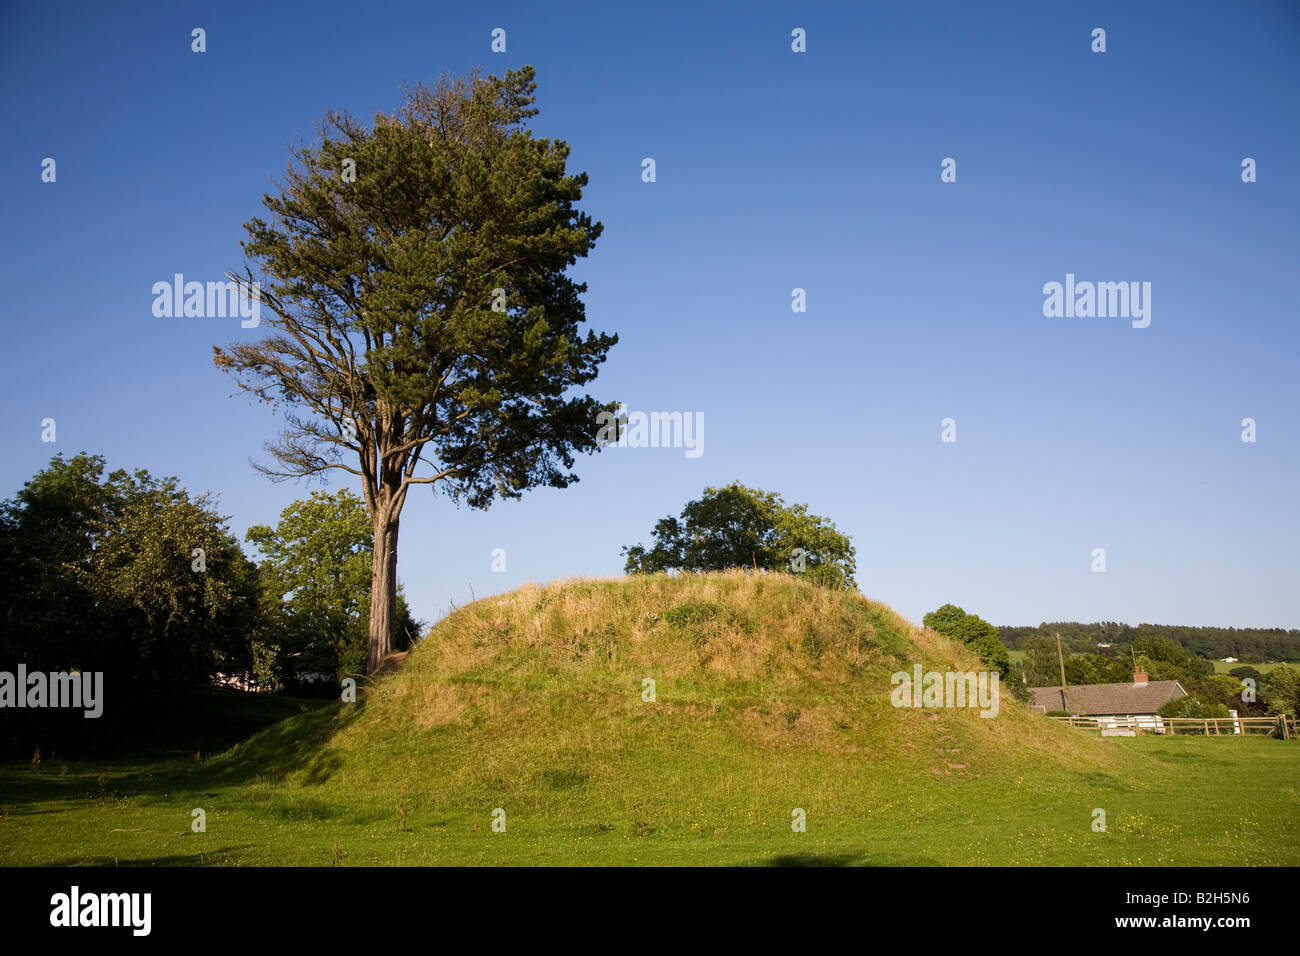 Castle mount or tump turret site of motte and bailey castle in 13th century Trellech Wales UK Stock Photo